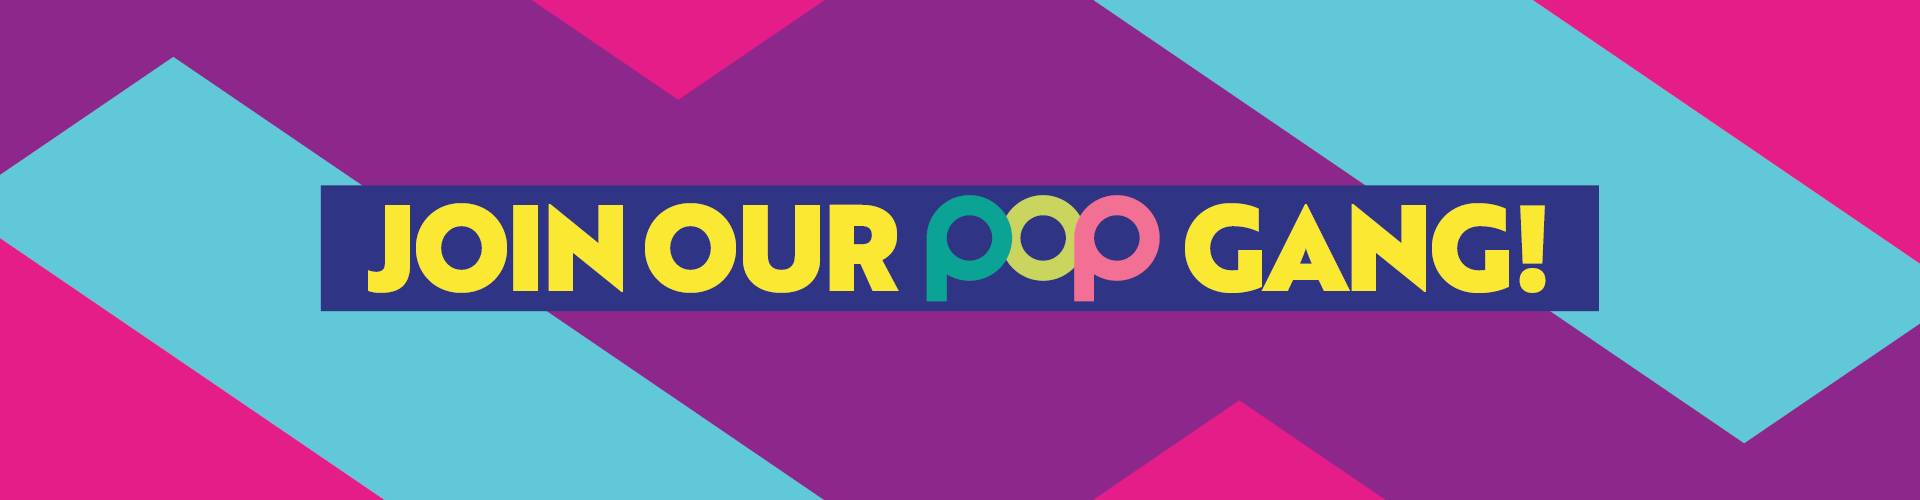 Join our Popworld Chelmsford gang! Sign up today